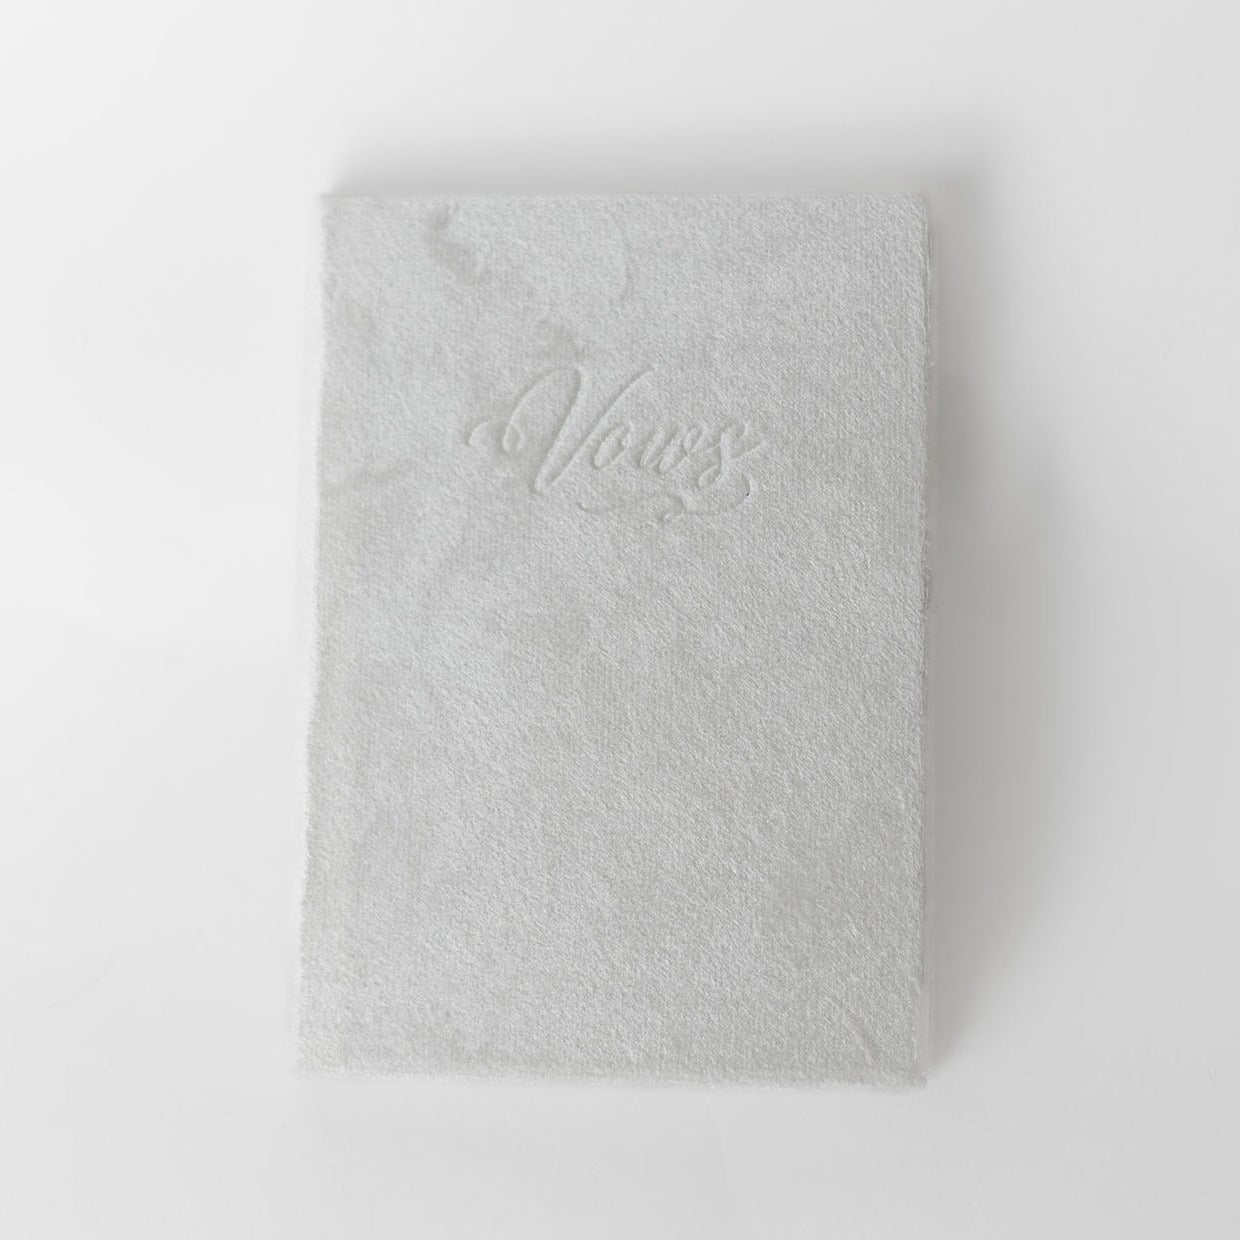 A white vow book with the word "Vows" embossed on the front cover.